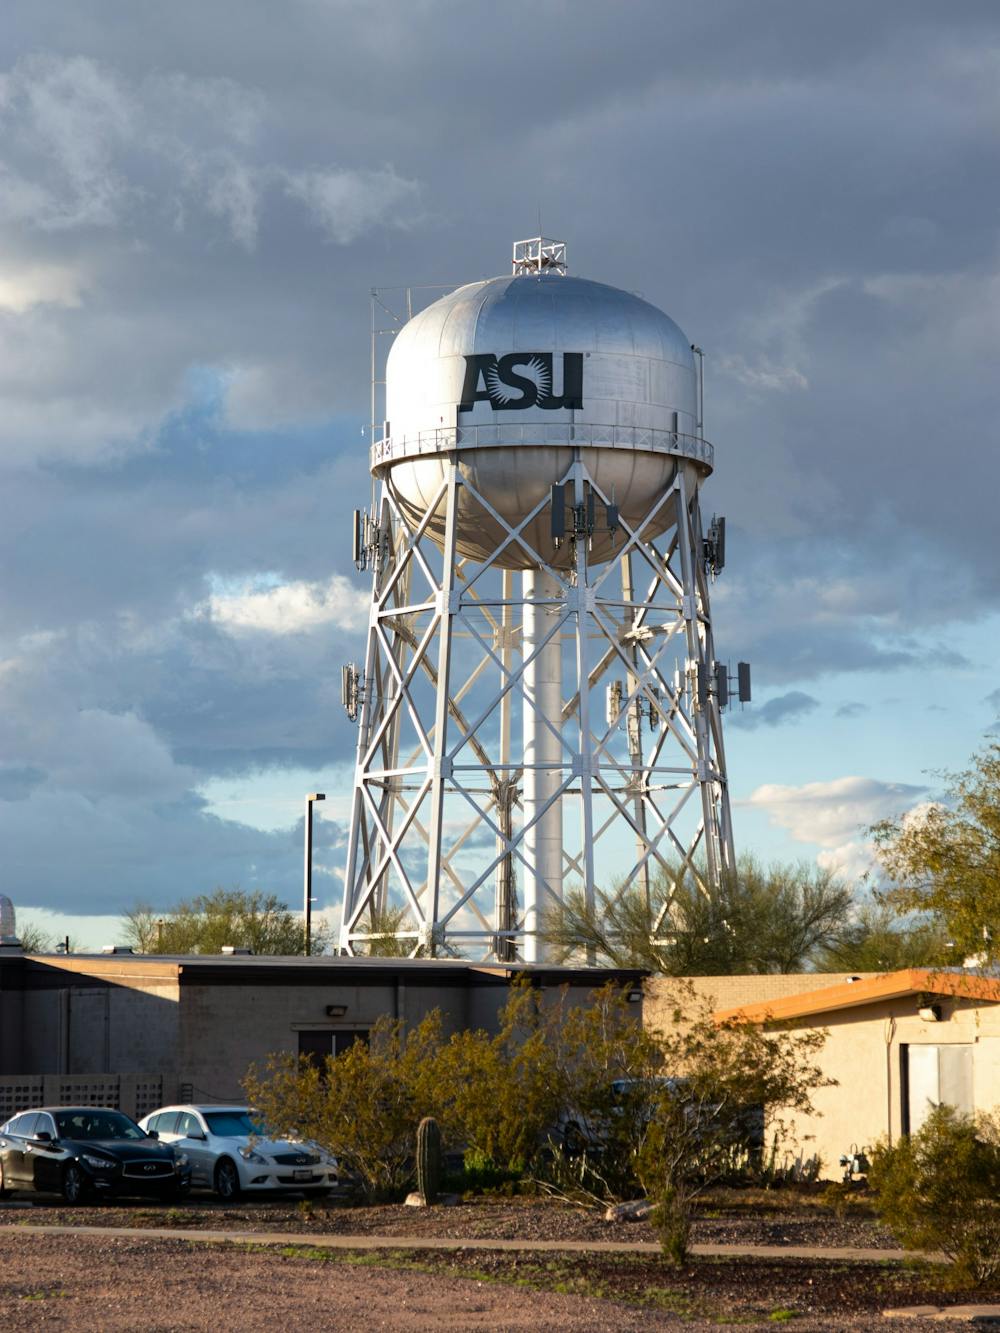 Lost in orbit: Experiencing ASU from its satellite campuses - The Arizona  State Press